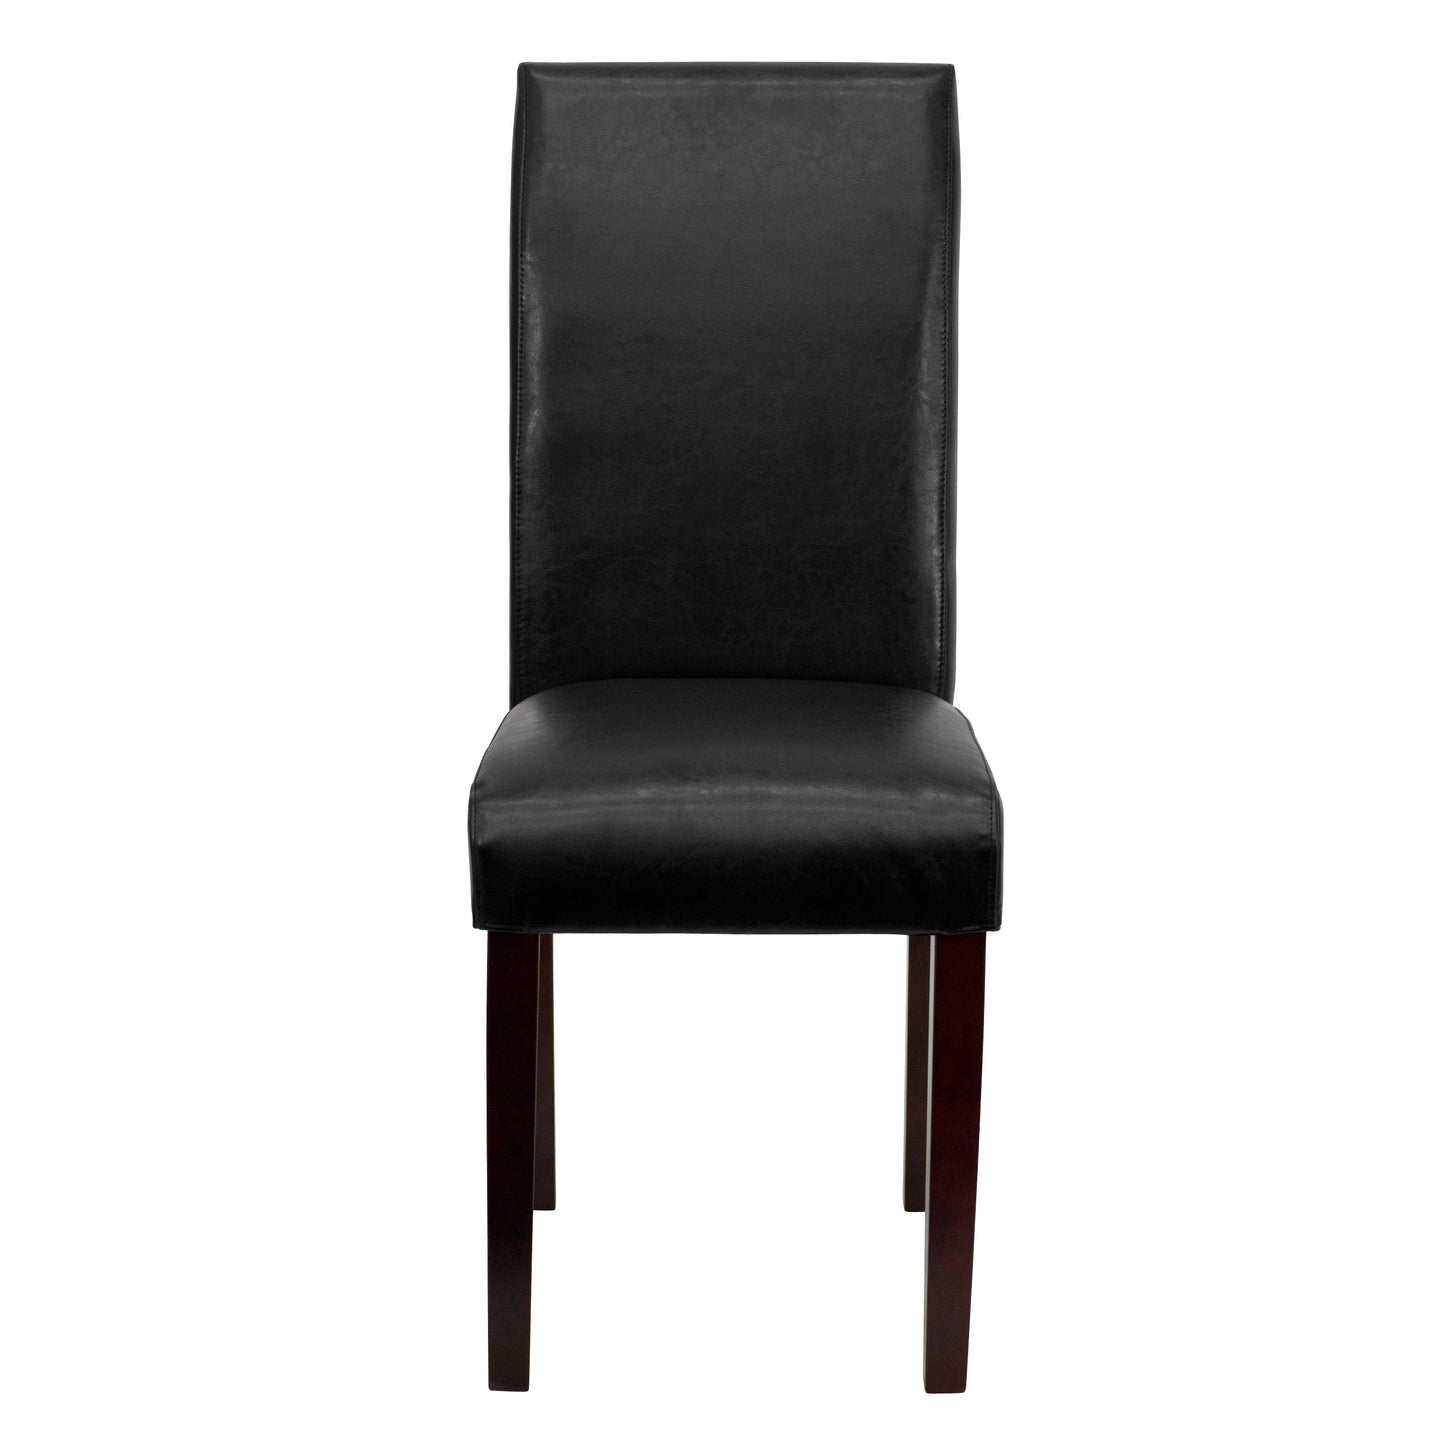 Flash Furniture Black Leather Upholstered Parsons Chair